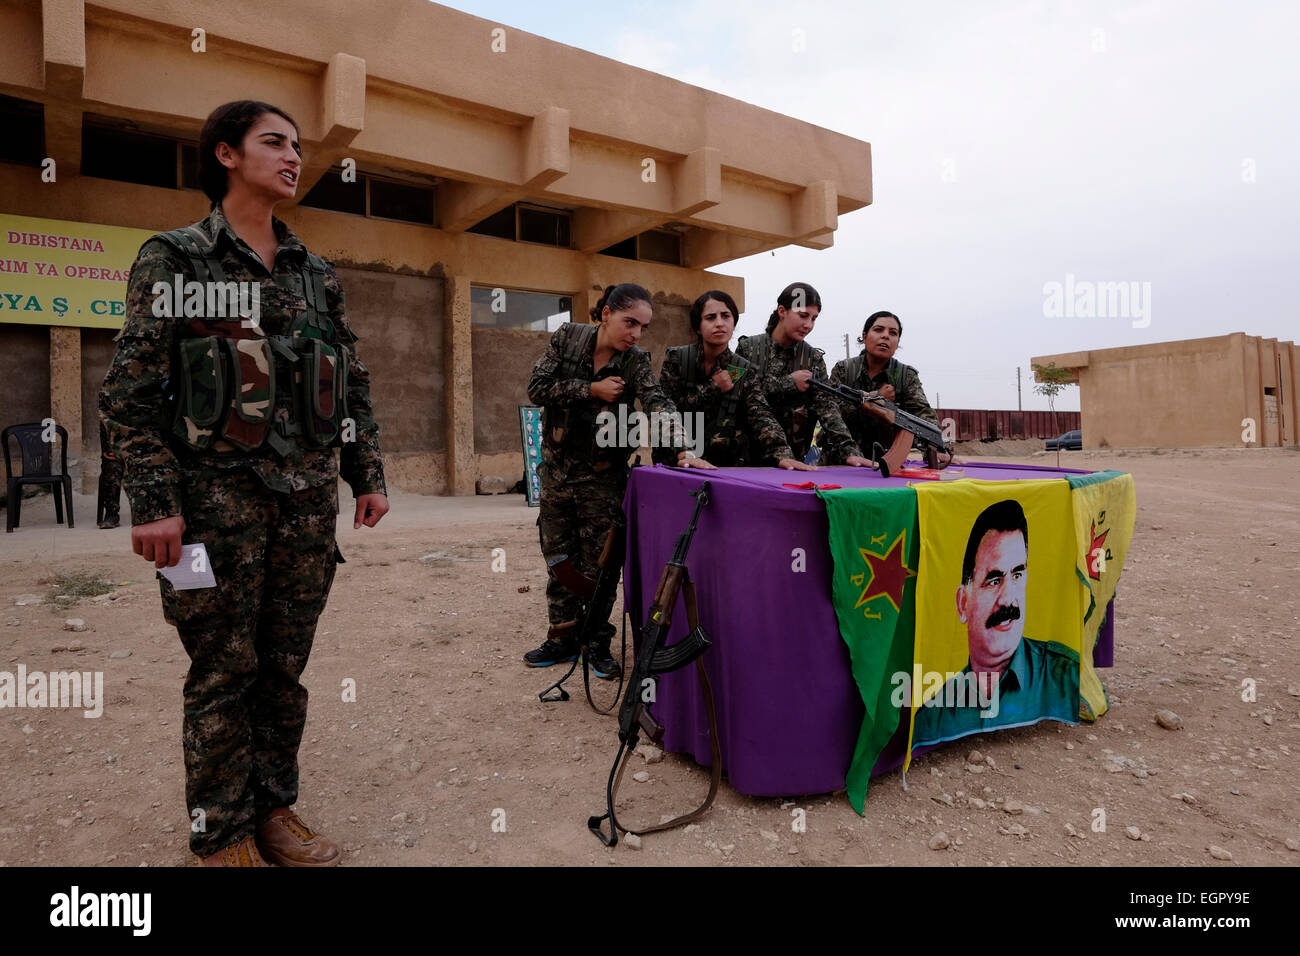 Kurdish fighters of the Women's Protection Units YPJ taking part in a swearing process over a flag bearing the figure of former PKK militant leader Abdullah Ocalan in a training camp in Al Hasakah or Hassakeh district in northern Syria Stock Photo